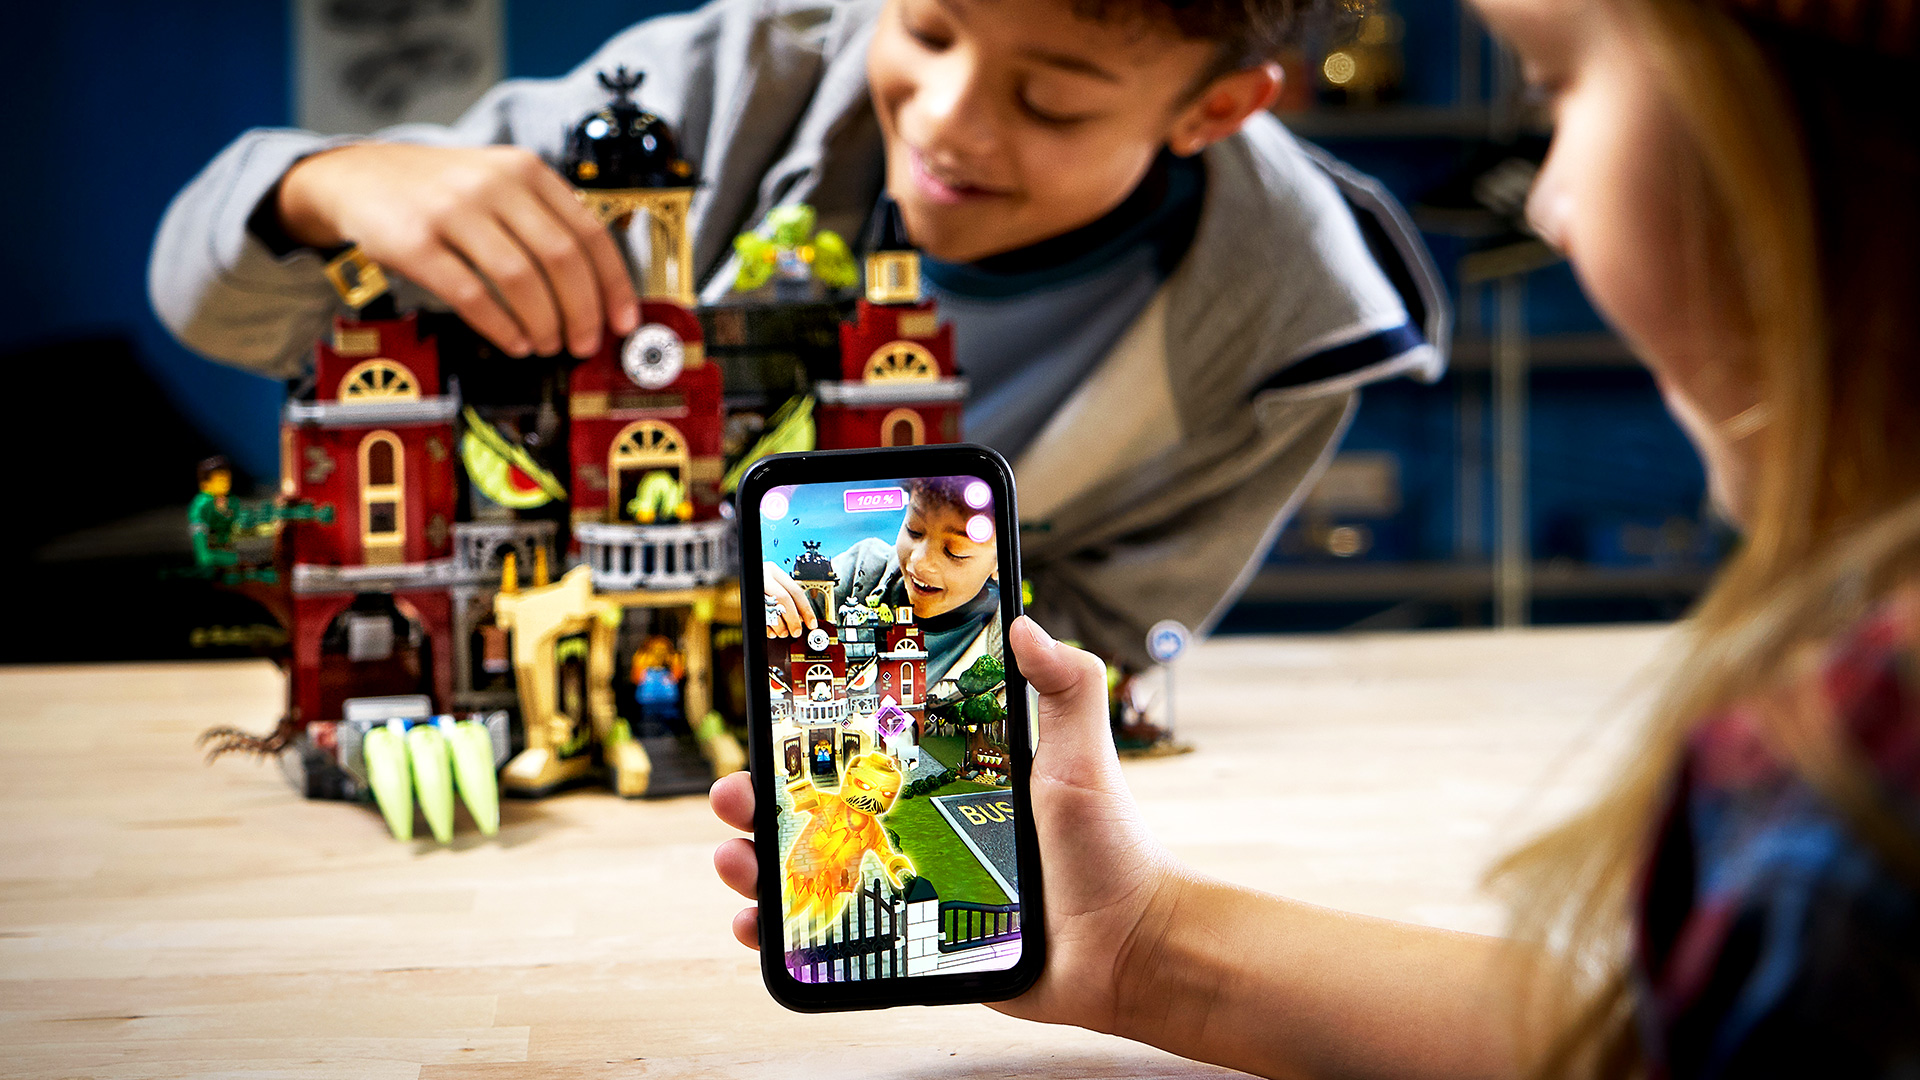 LEGO AR-enabled mobile playsets